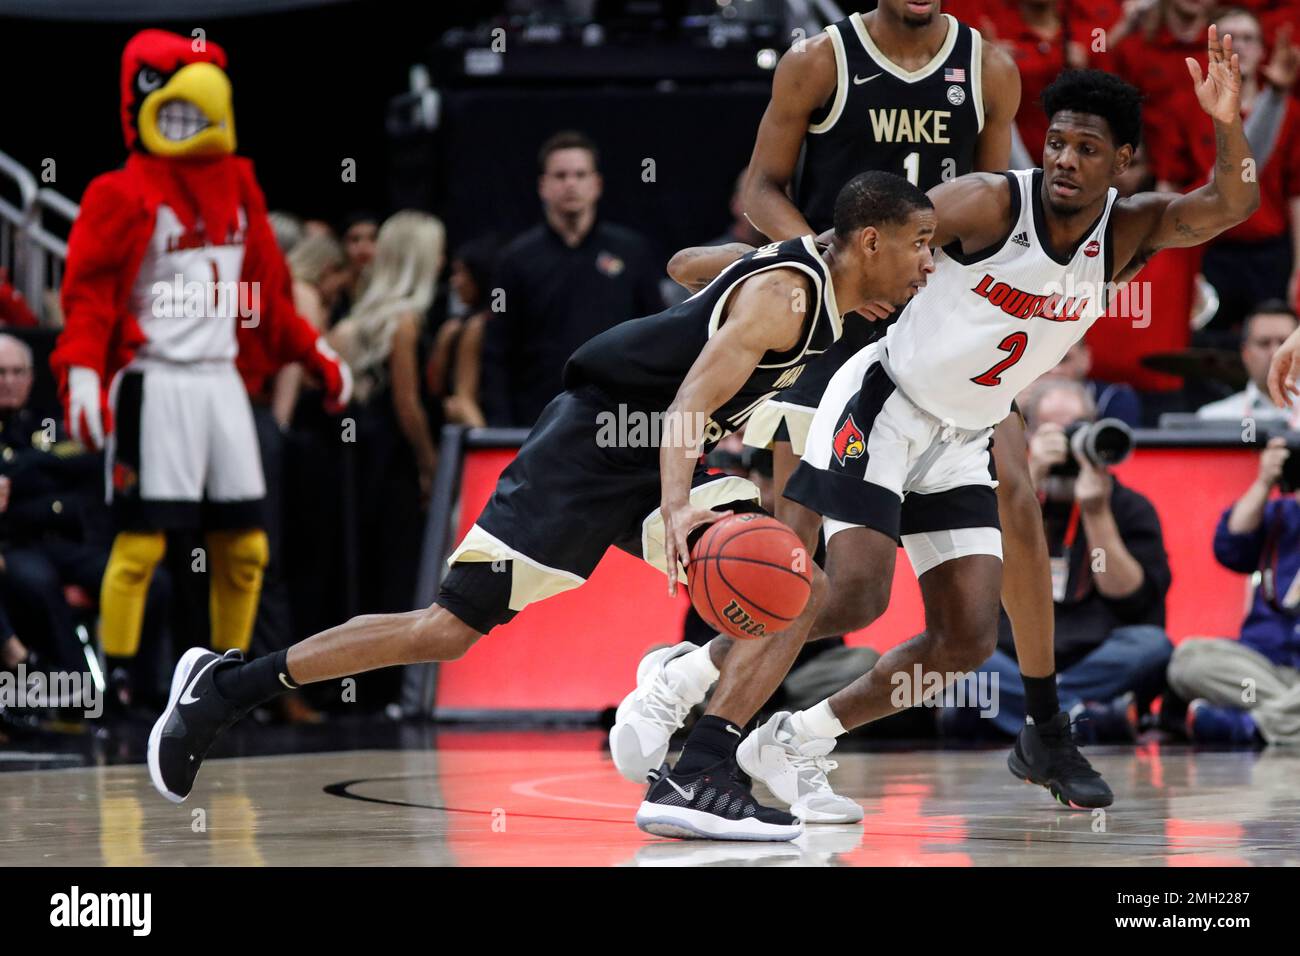 Louisville guard Darius Perry (2) defends as Wake Forest guard Torry Johnson (11) drives to the basket during the second half of an NCAA college basketball game Wednesday, Feb. 5, 2020, in Louisville, Ky. Louisville won 86-76. (AP Photo/Wade Payne) Stock Photo